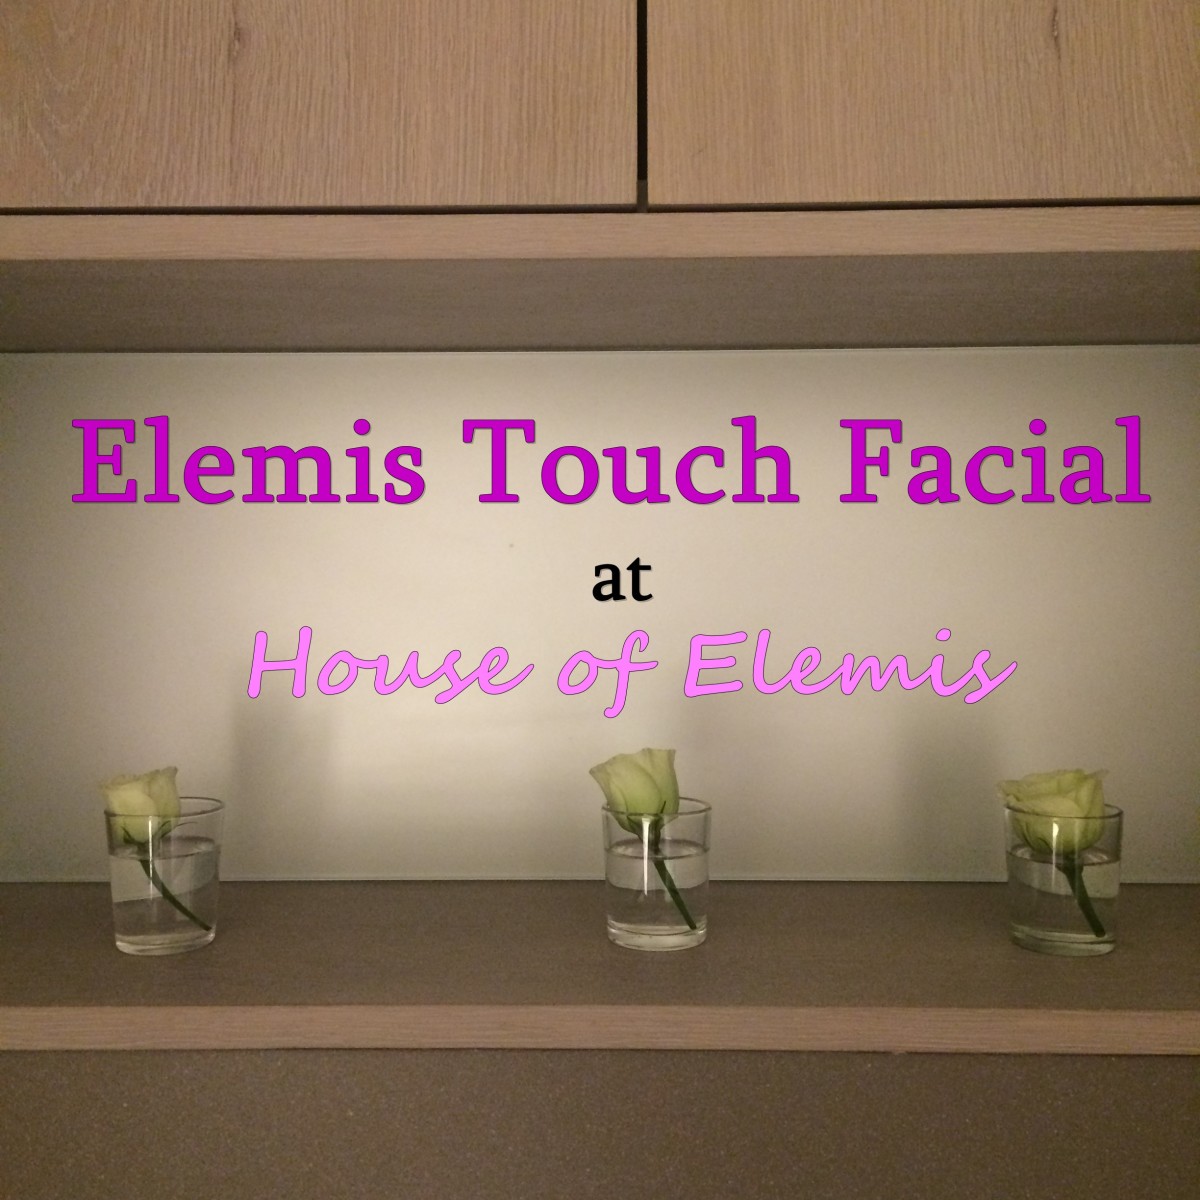 Elemis Touch Facial at House of Elemis